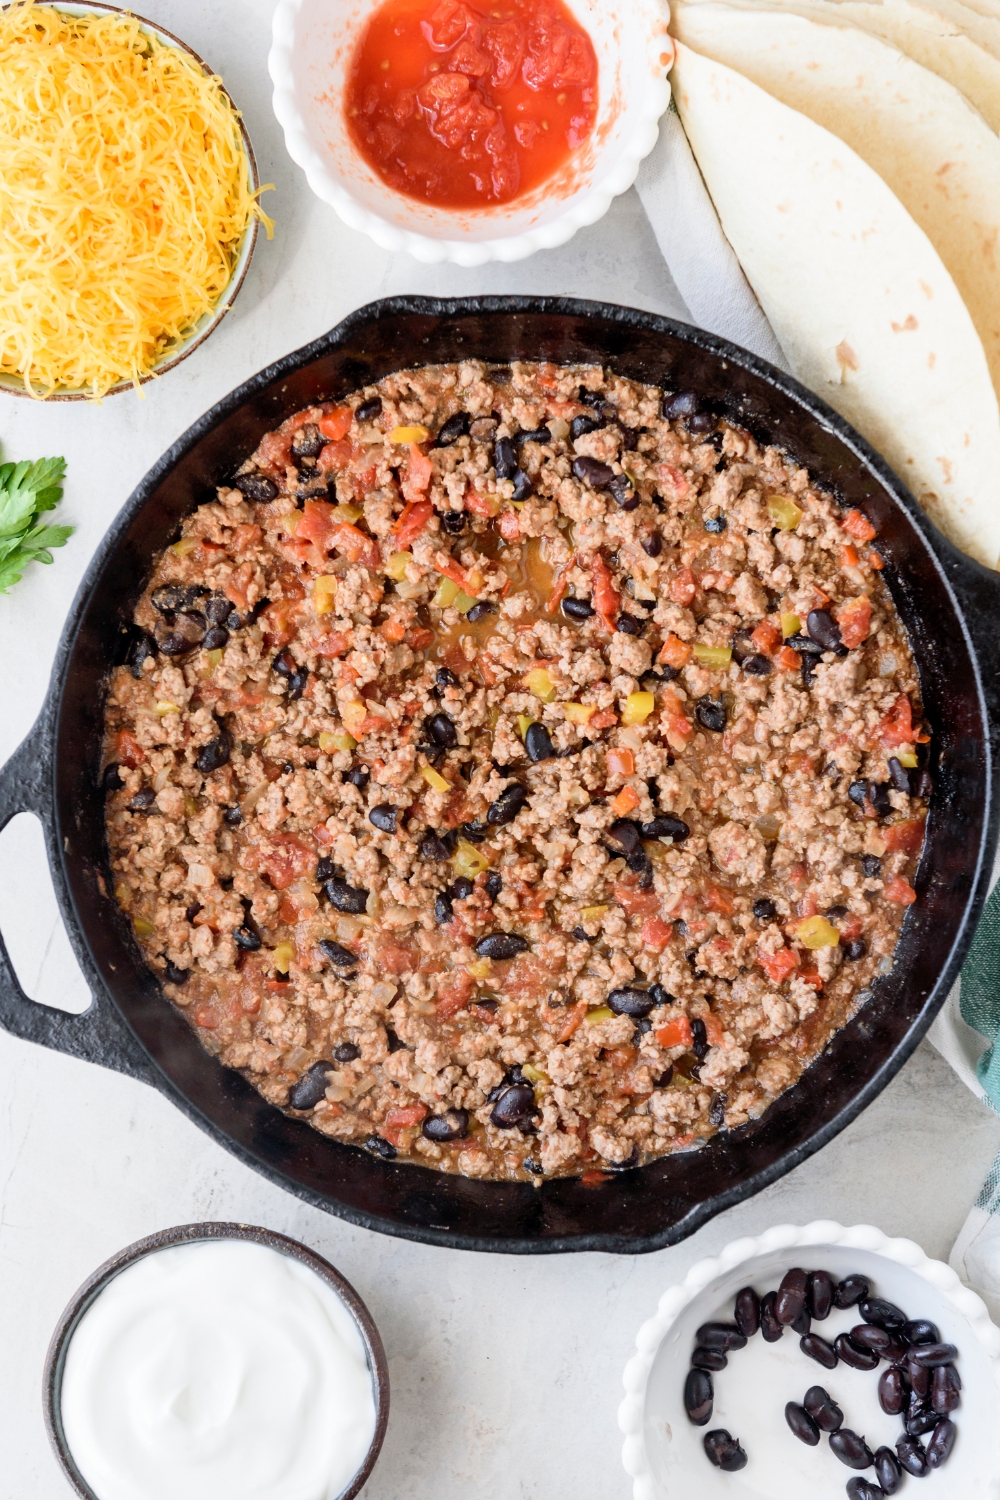 A skillet filled with ground beef, diced peppers, and black beans and tomatoes.